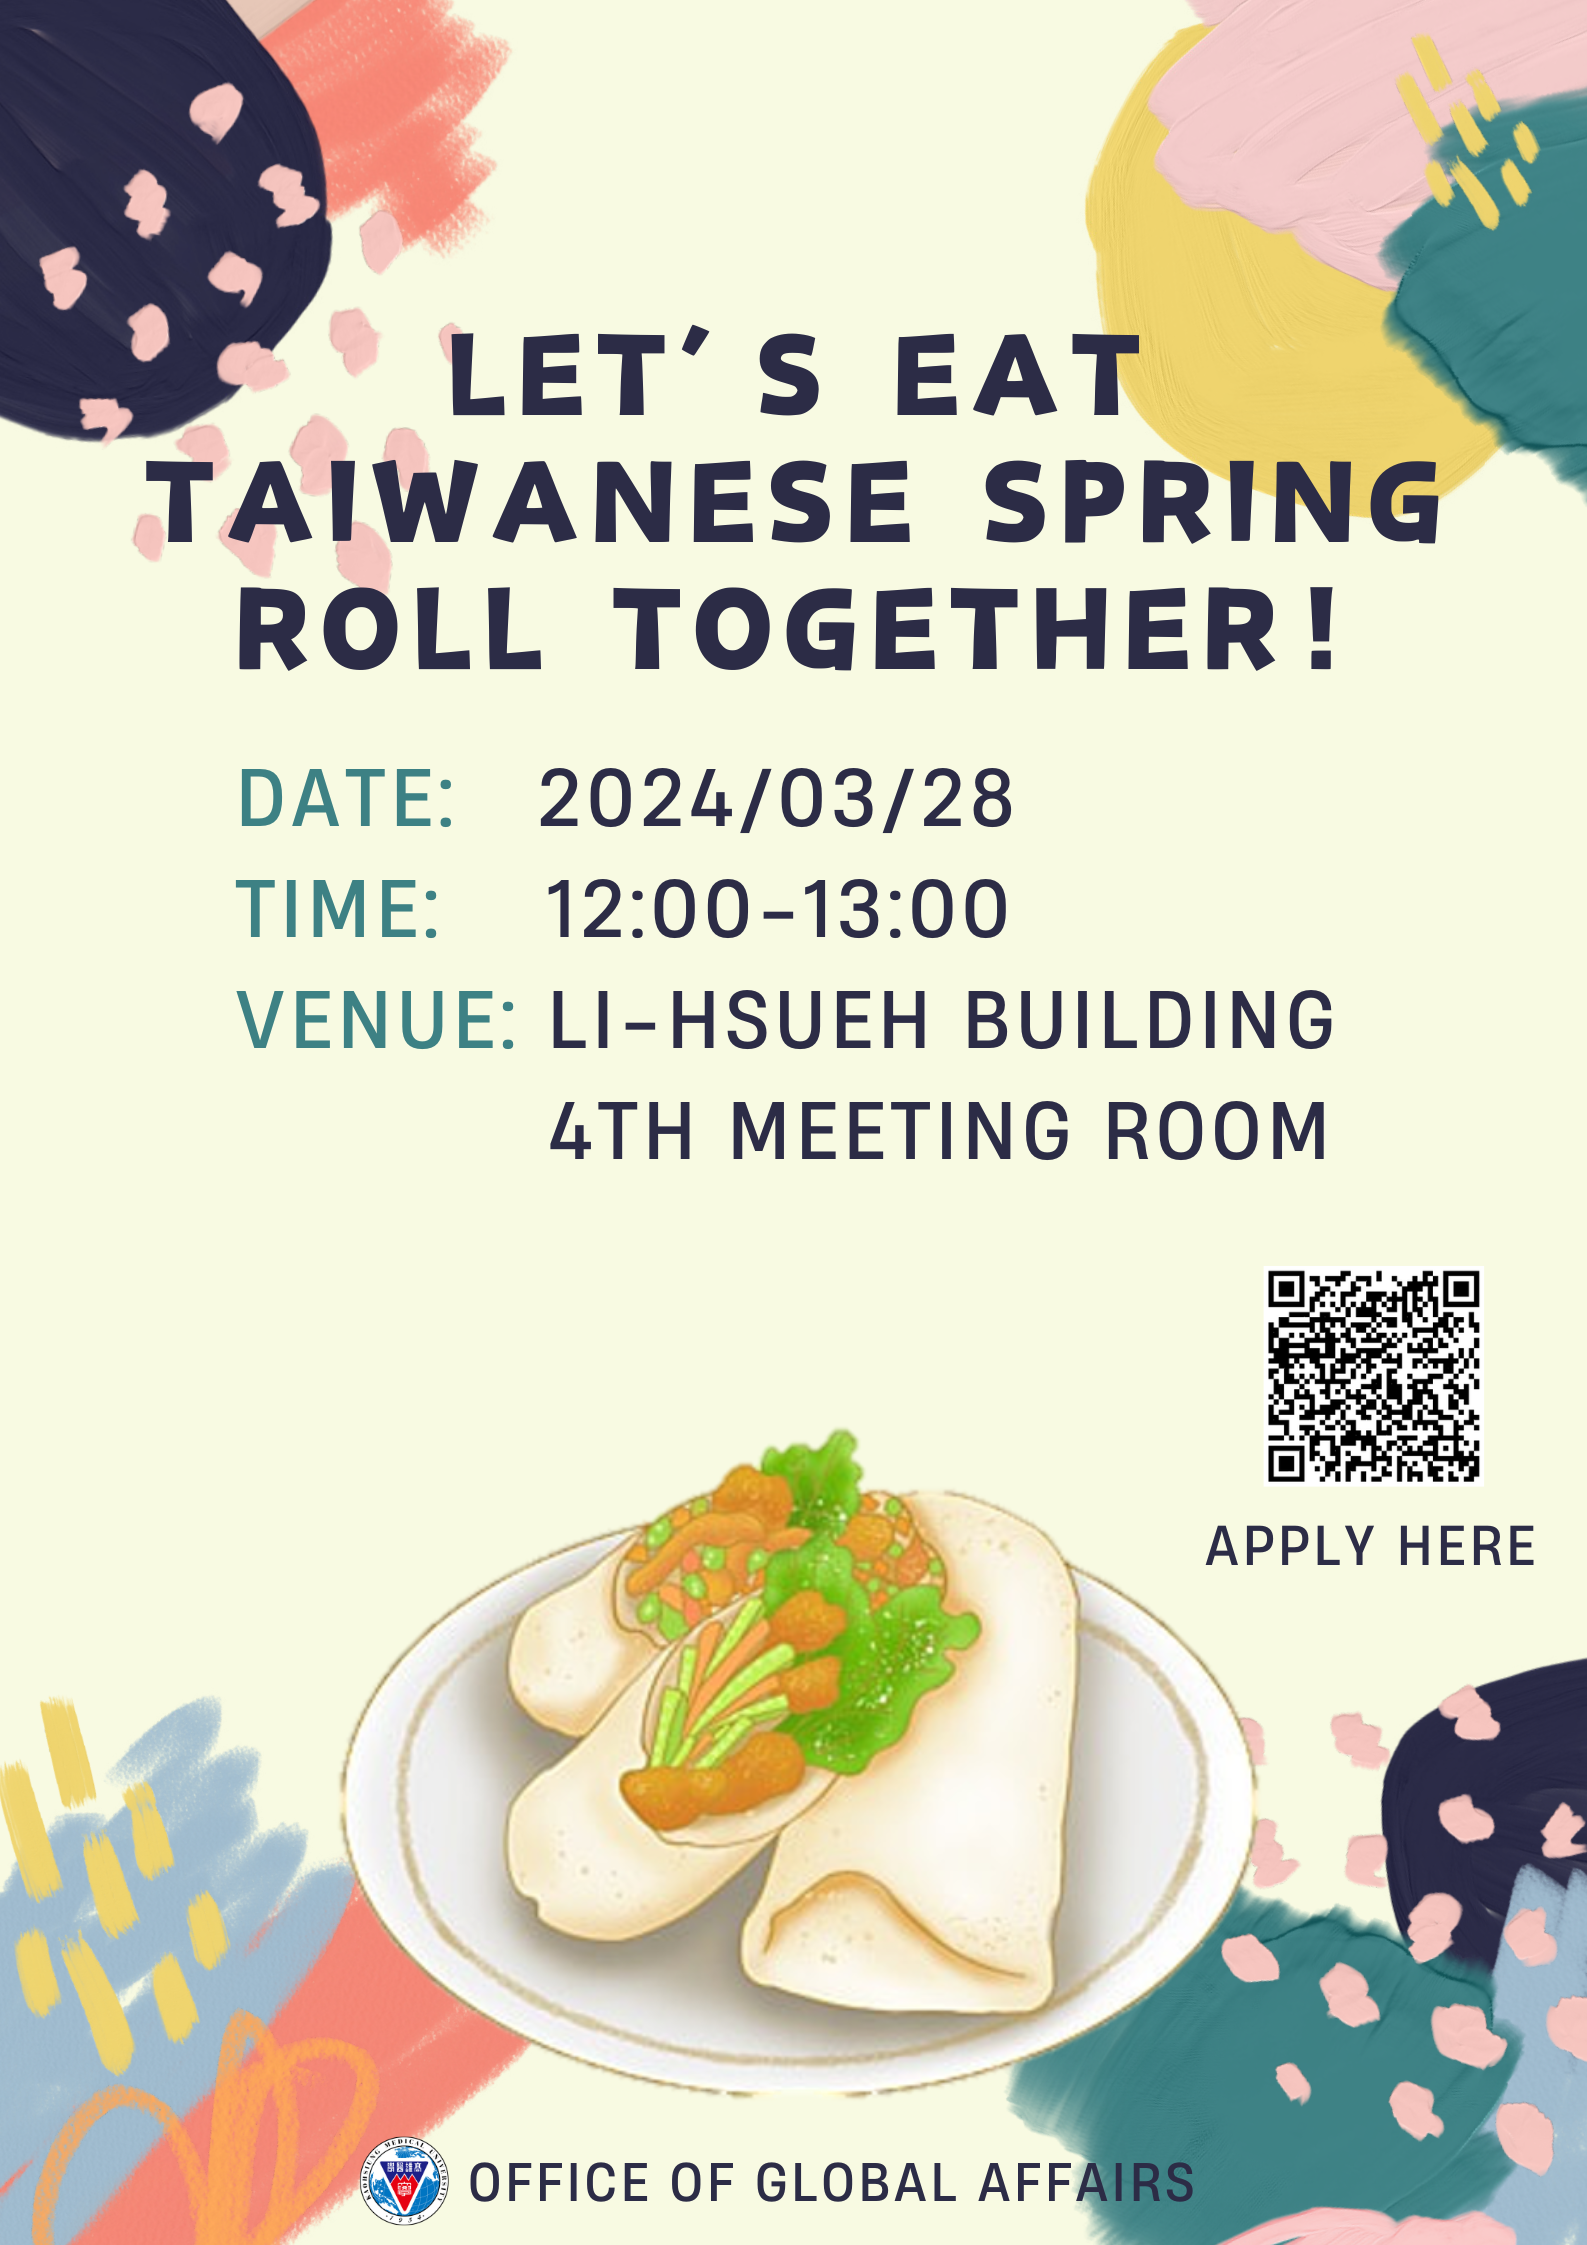 Lets eat taiwanese spring roll together